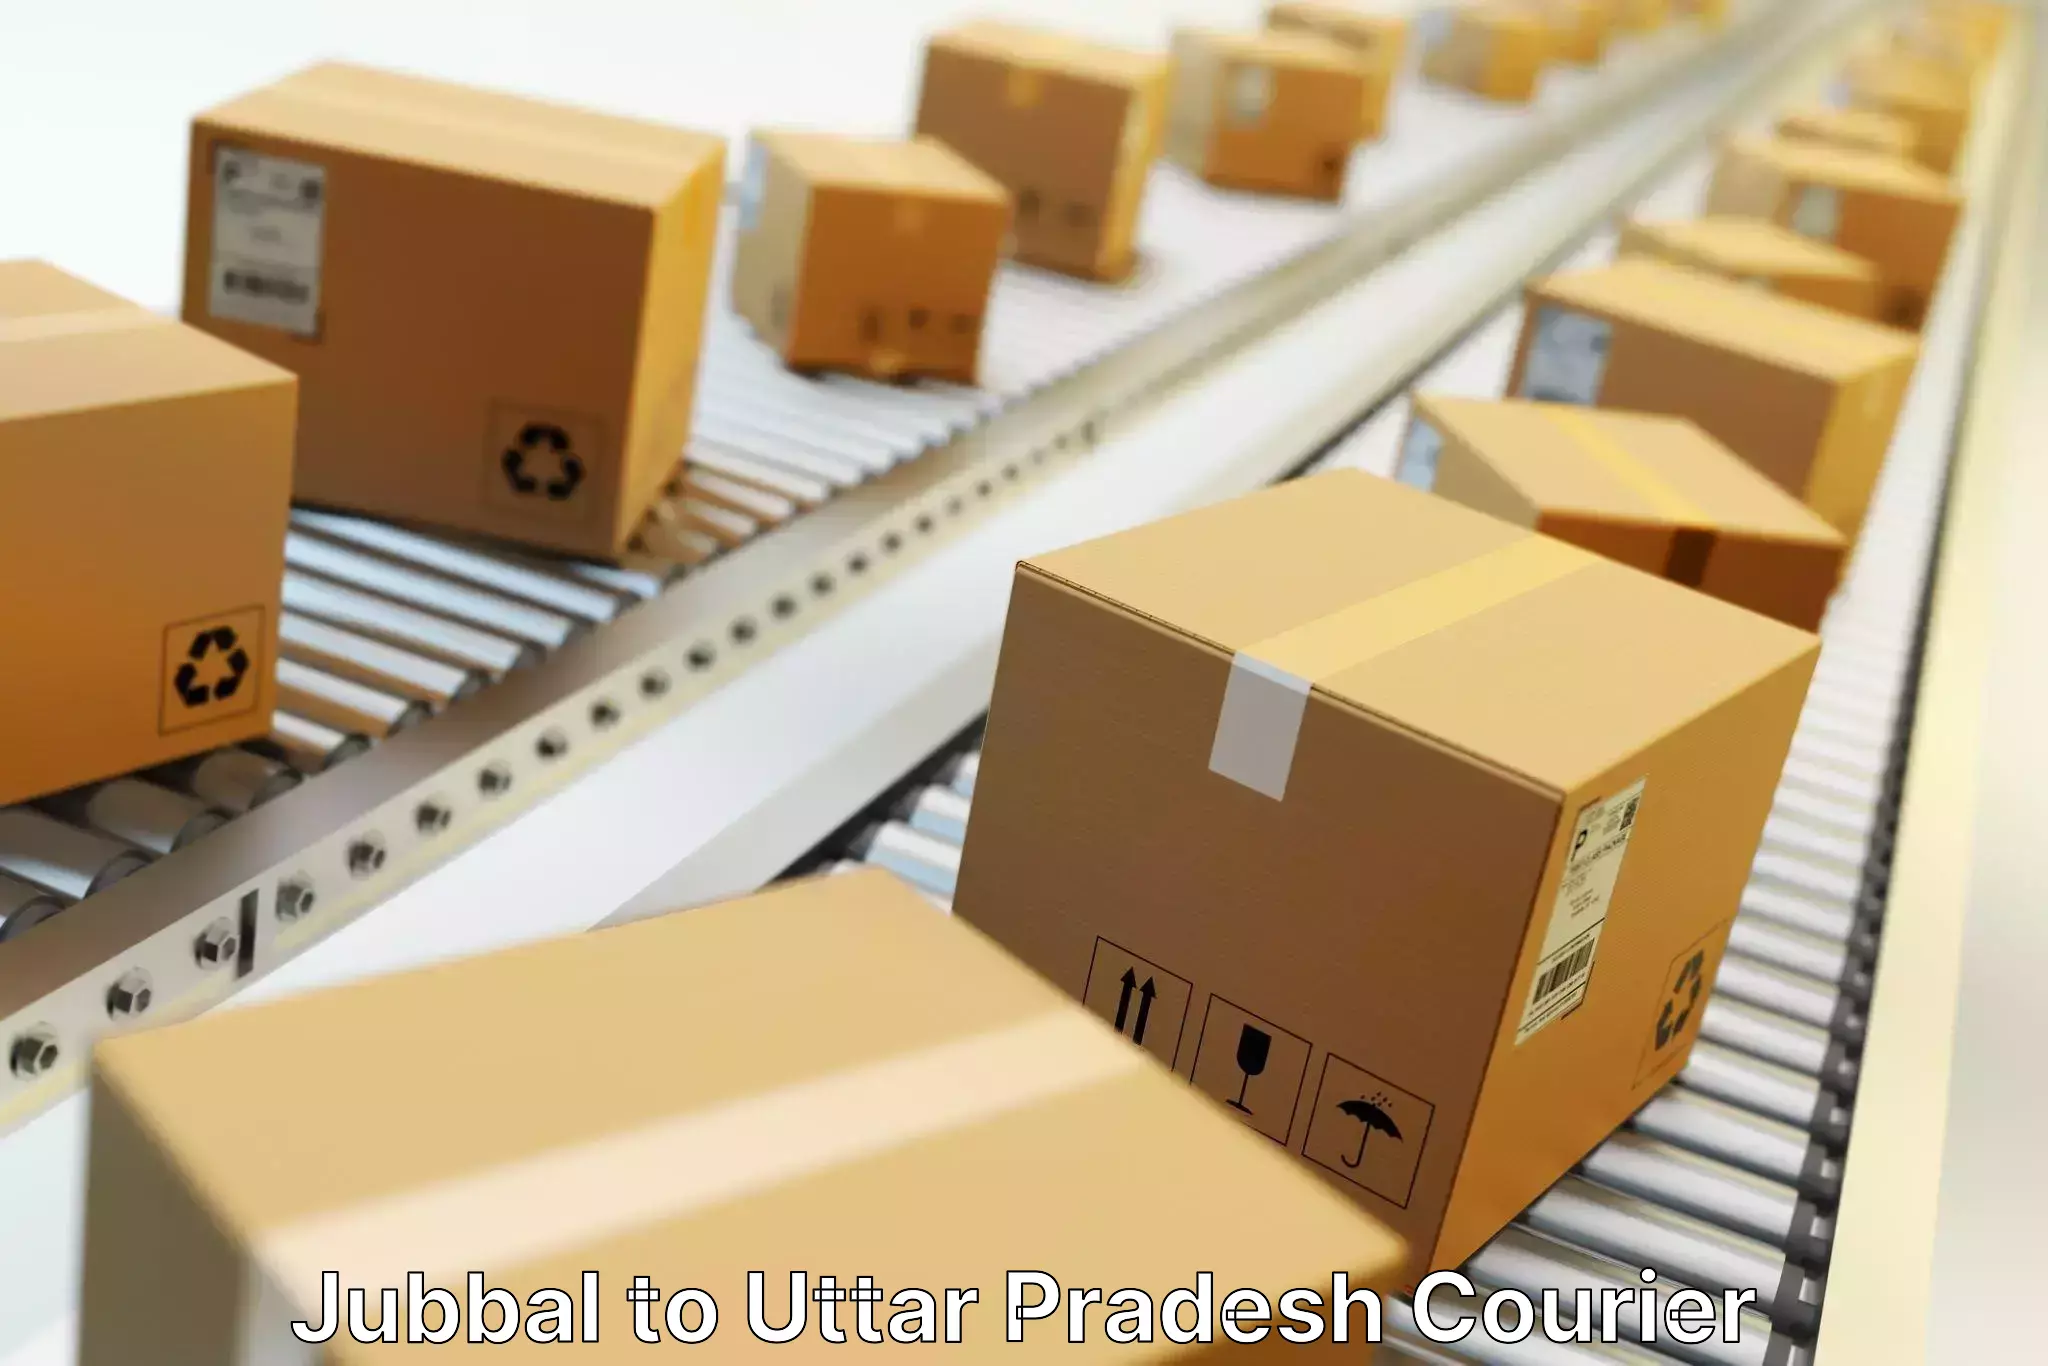 Domestic delivery options Jubbal to Uttar Pradesh